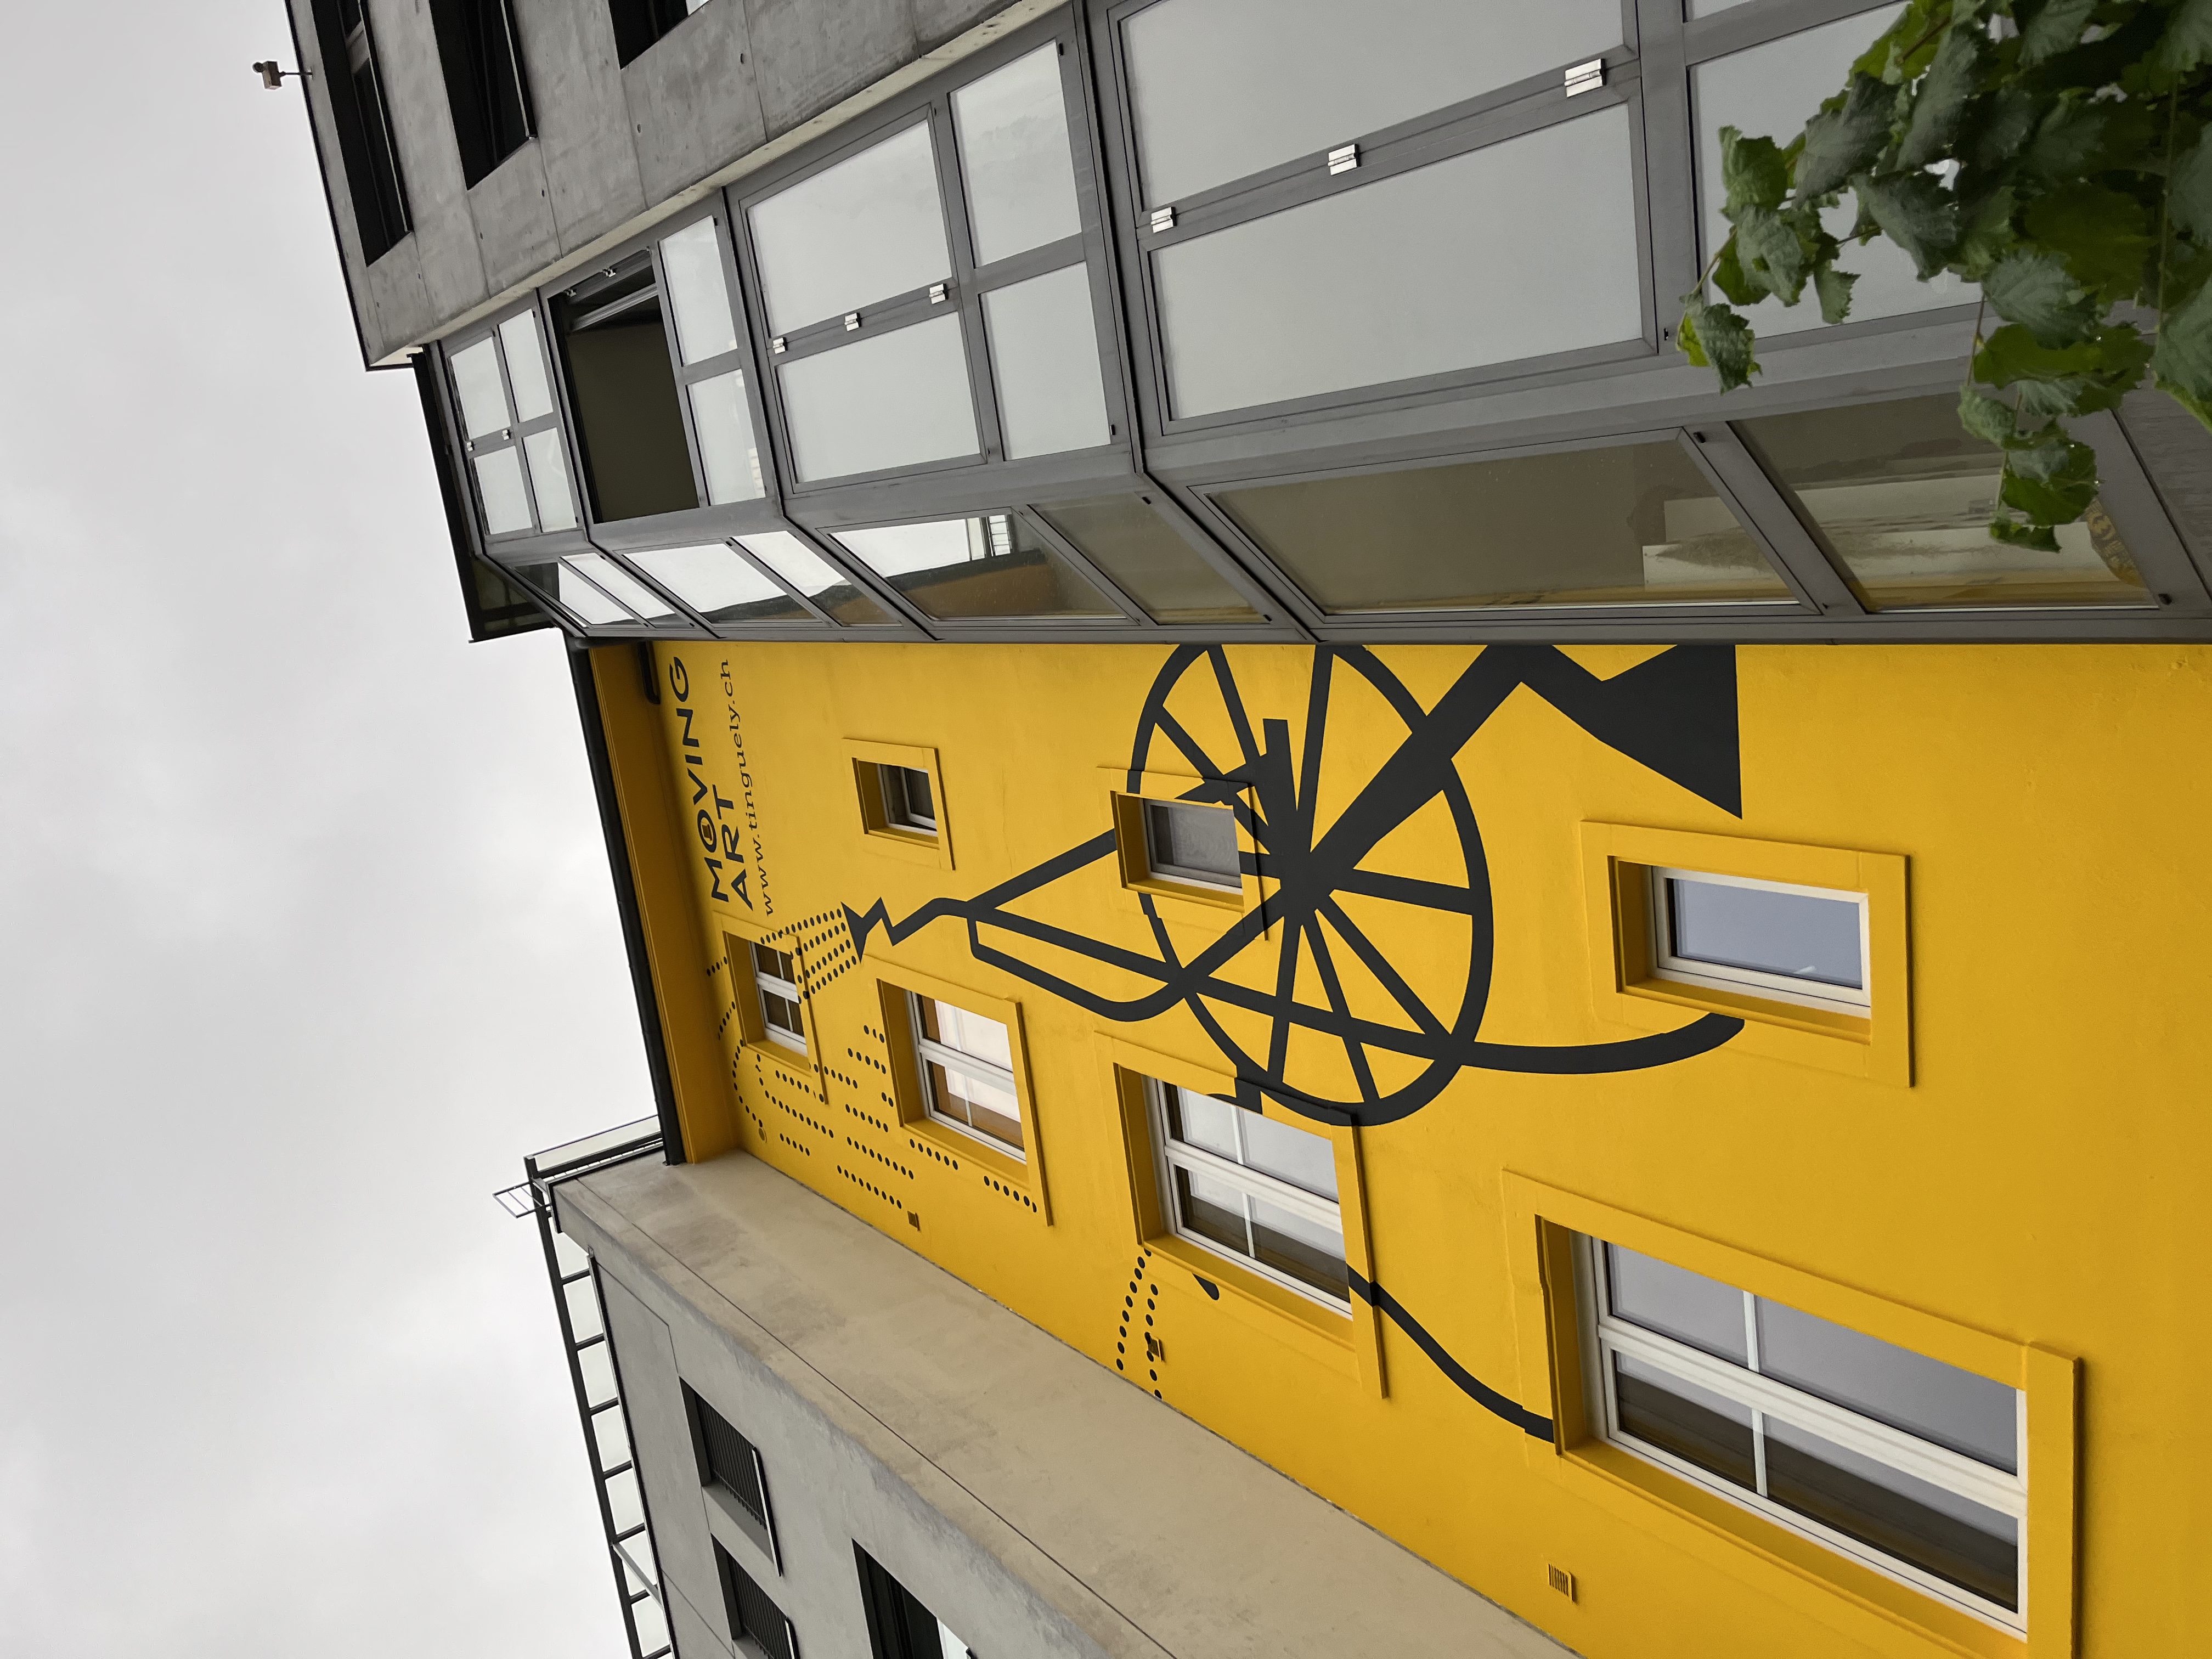 https://www.sarahweishaupt.ch/media/pages/home/illustration-fassade-fuer-museum-tinguely/2472b1dae6-1656364119/3627dabe-d8cf-46c8-b0ba-add298770446.jpeg